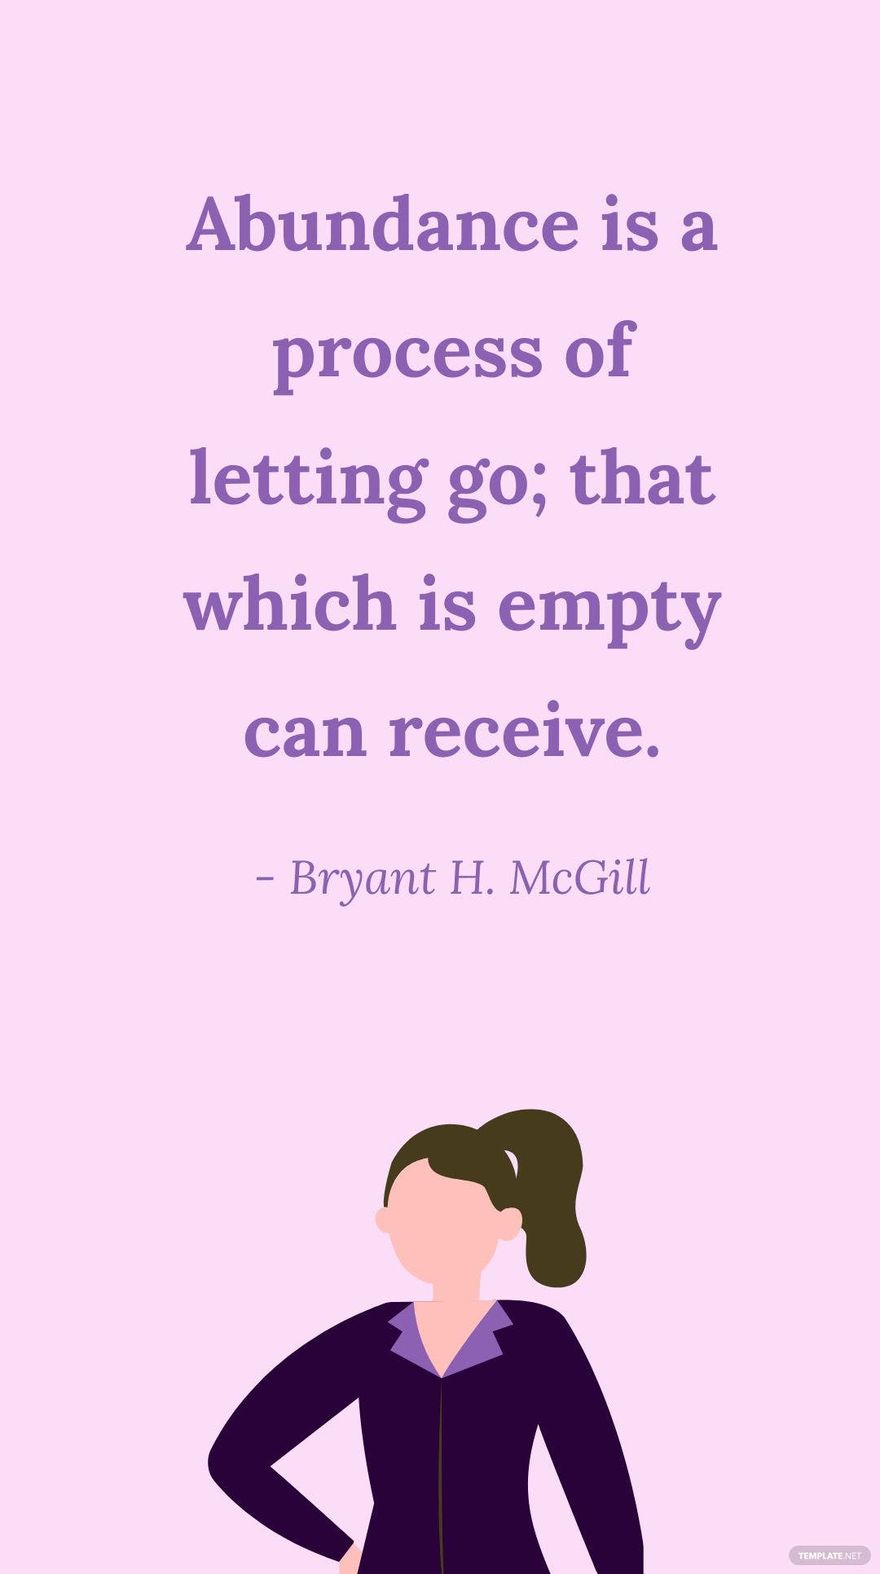 Bryant H. McGill - Abundance is a process of letting go; that which is empty can receive.